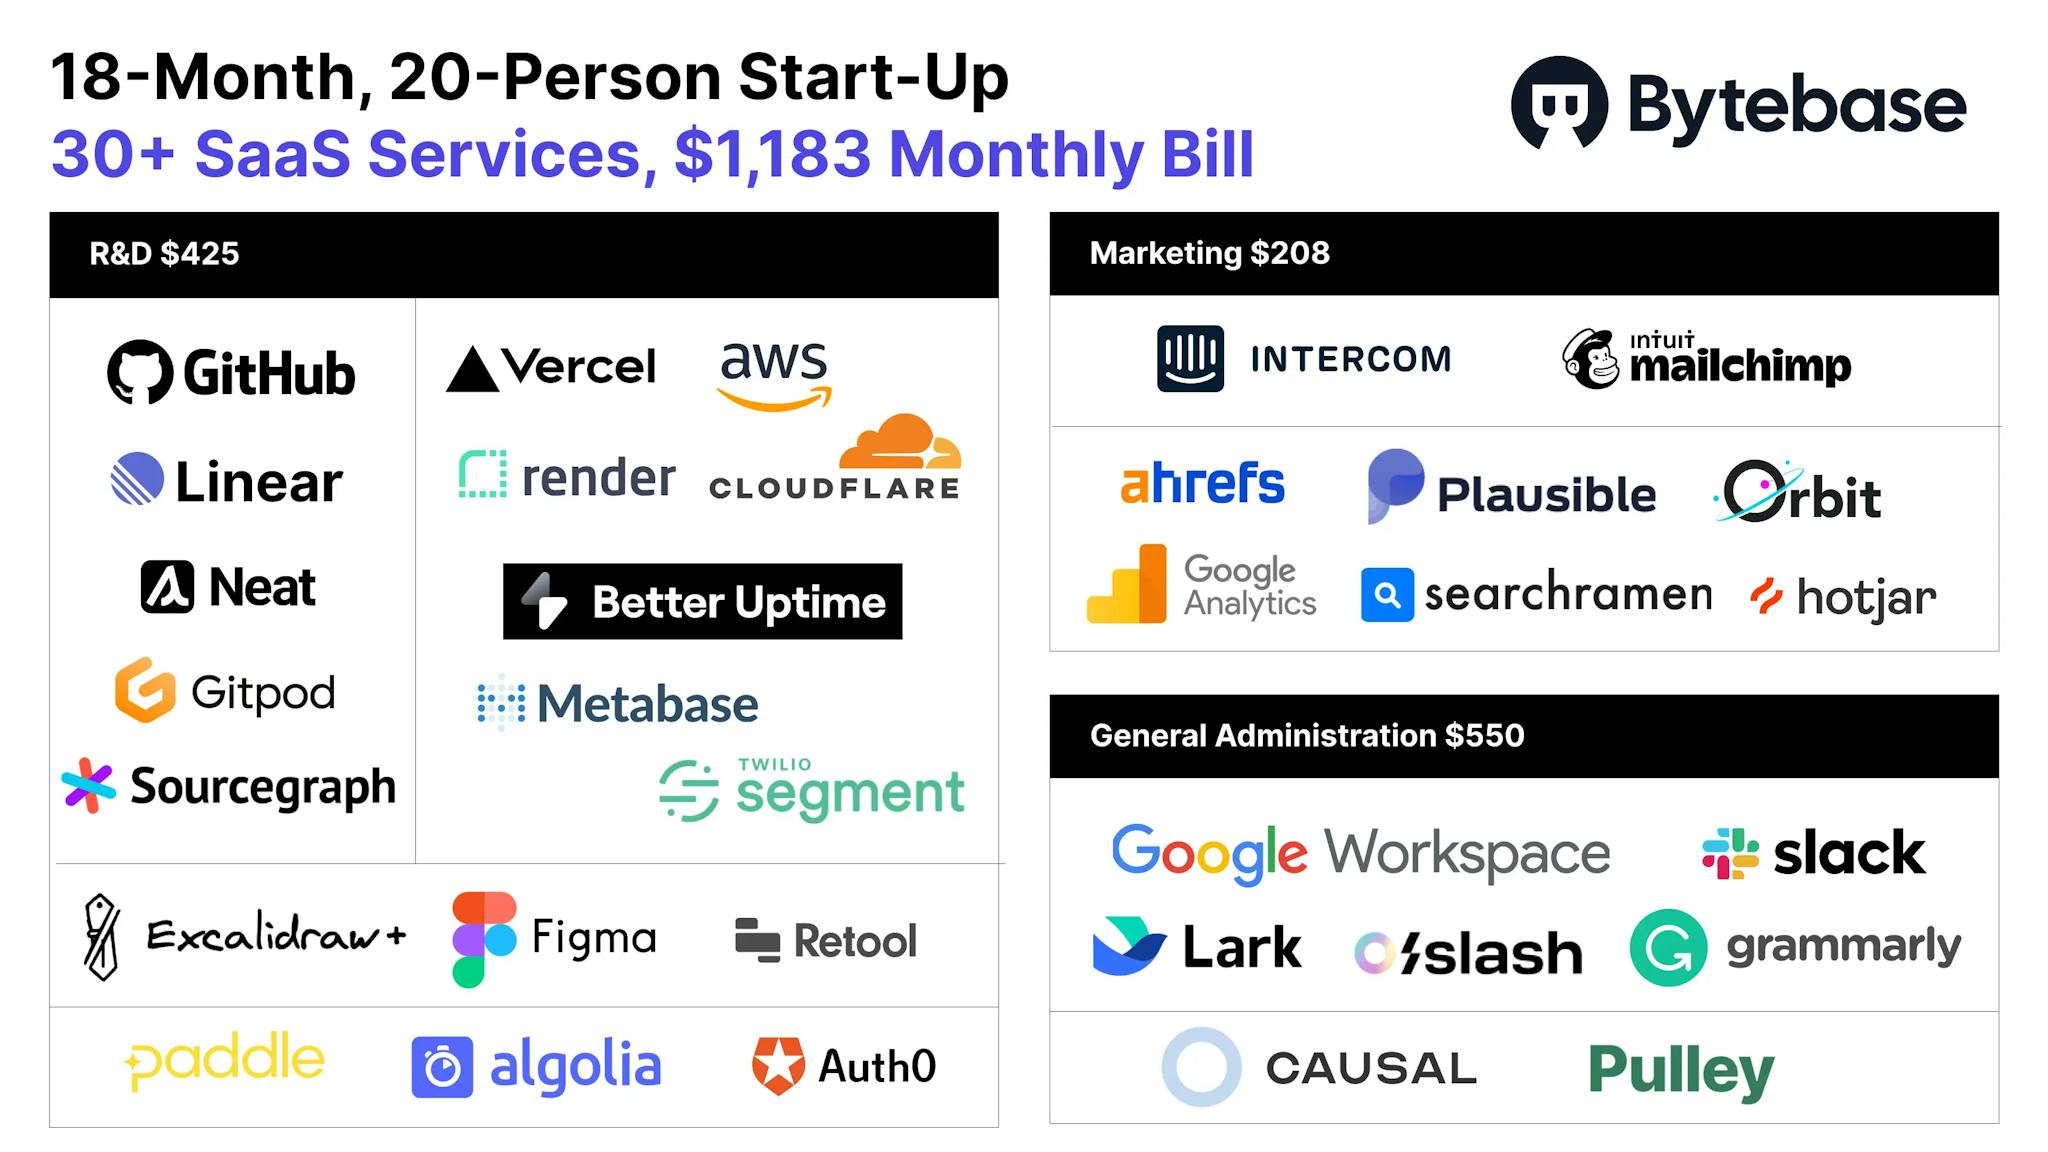 20-Person Start-Up, 30+ SaaS Services, and $1,183 Monthly Bill